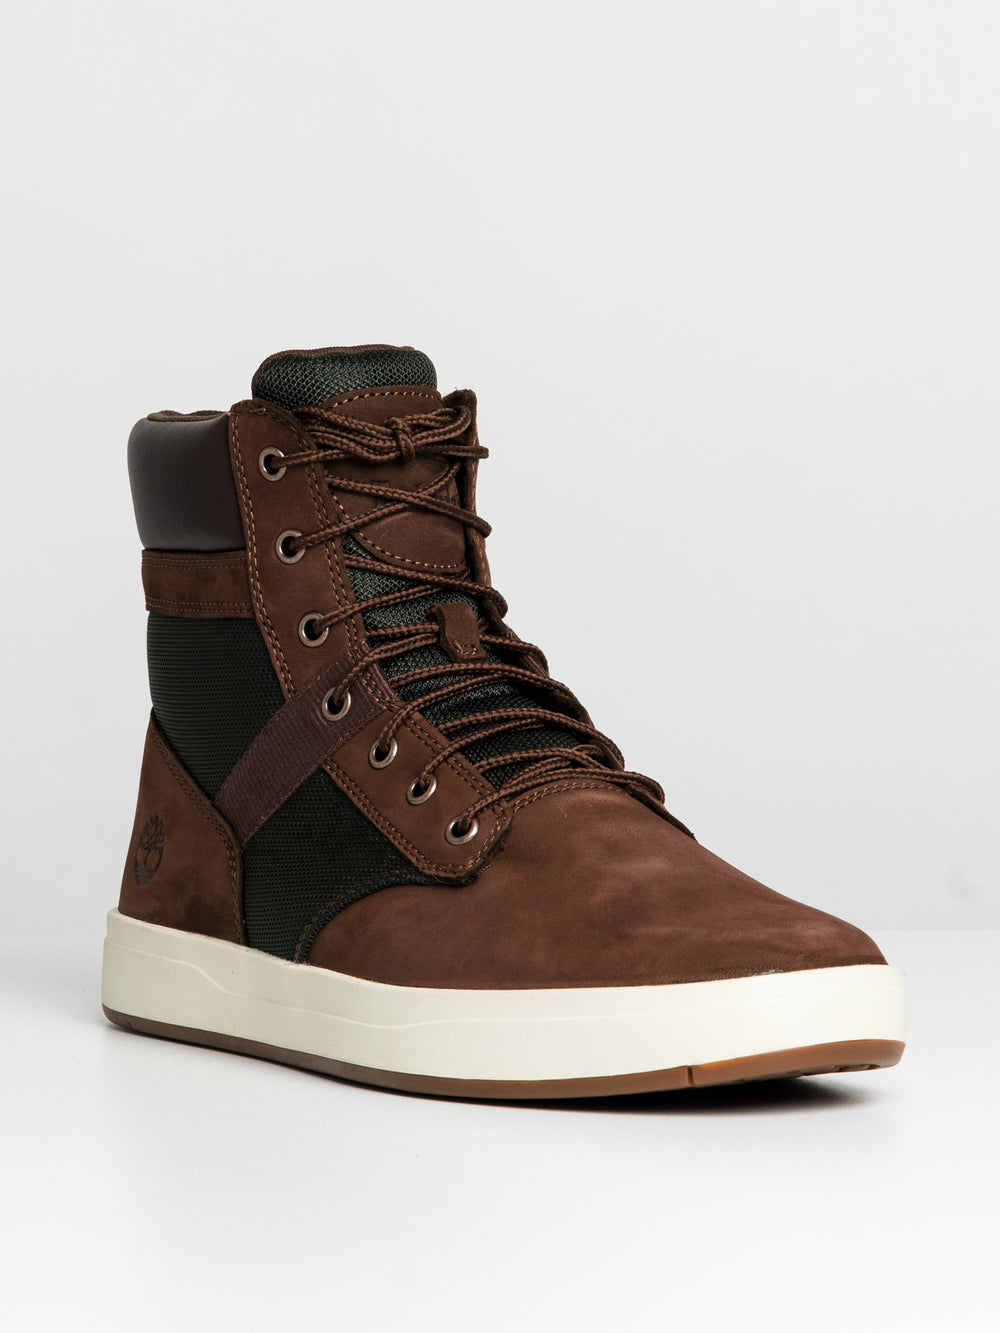 TIMBERLAND DAVIS SQUARE LEATHER BOOT MENS - CLEARANCE